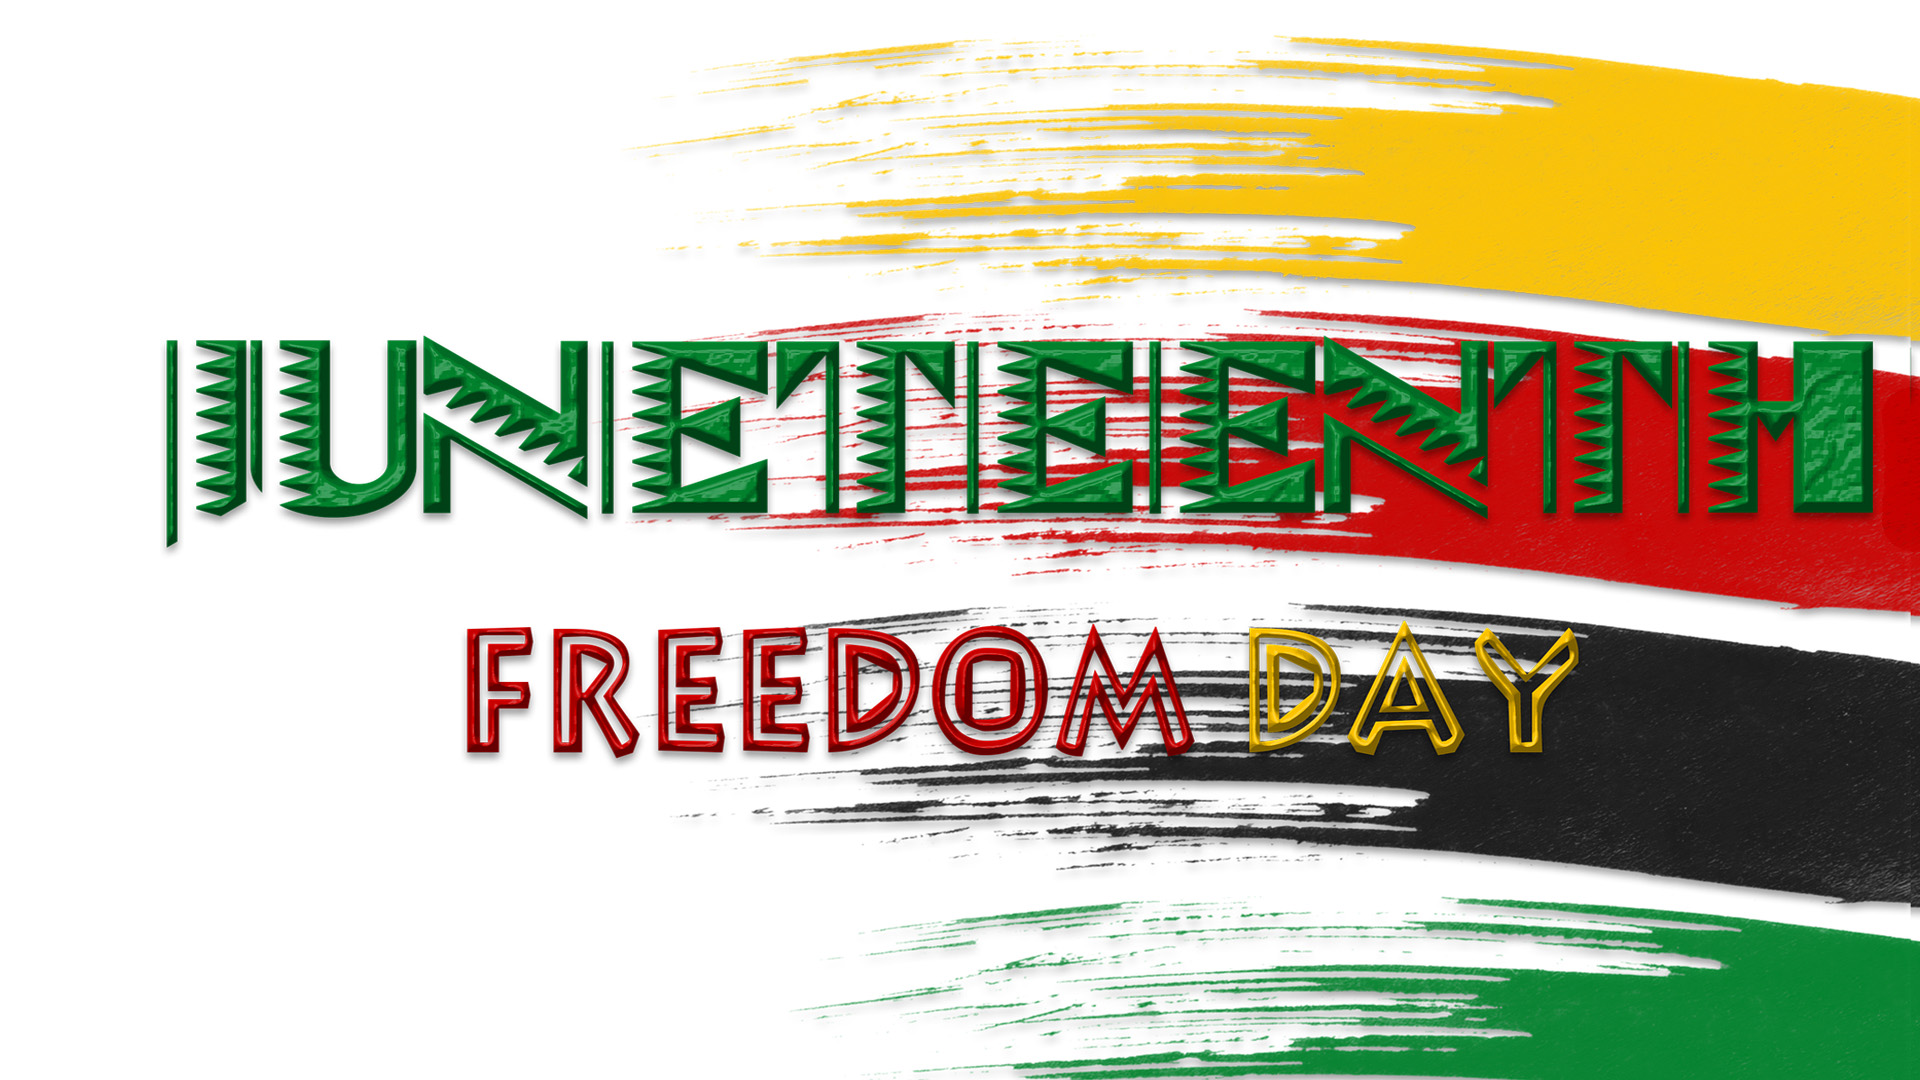 Paint brush strokes of Yellow, red, black and green are along the right side of the graphic swiping toward the middle of the screen. Juneteenth Freedom Day written is in decorative aztec font in the center of the graphic